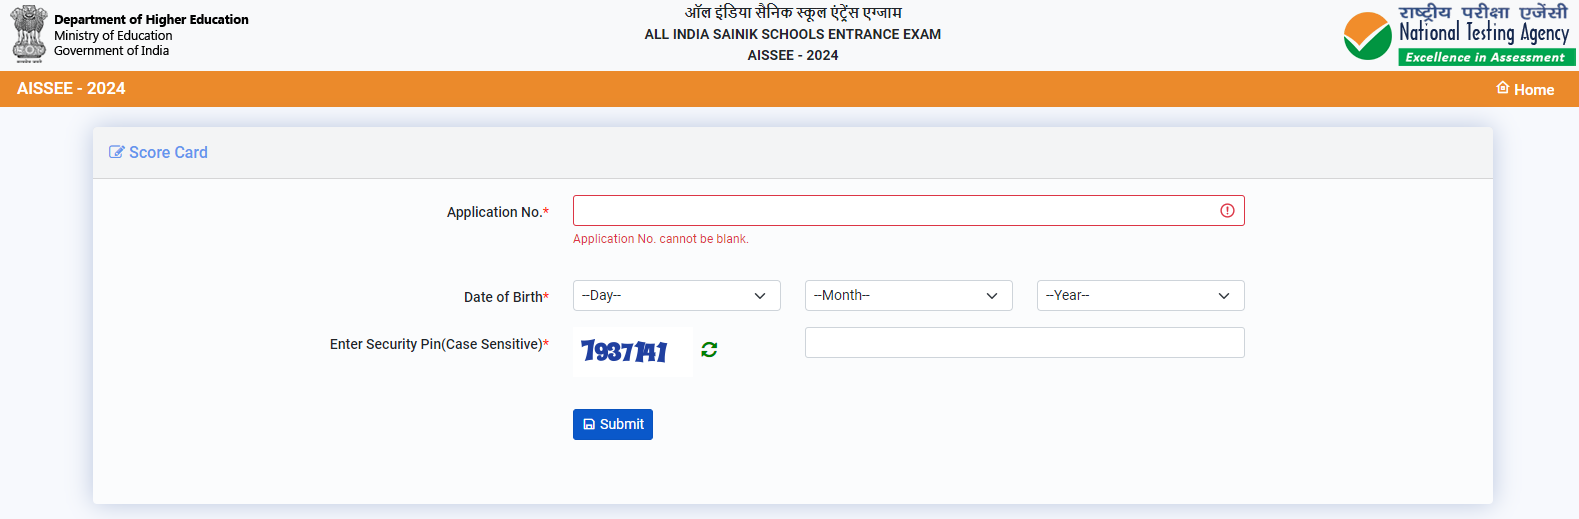 how to download sainik school result aissee